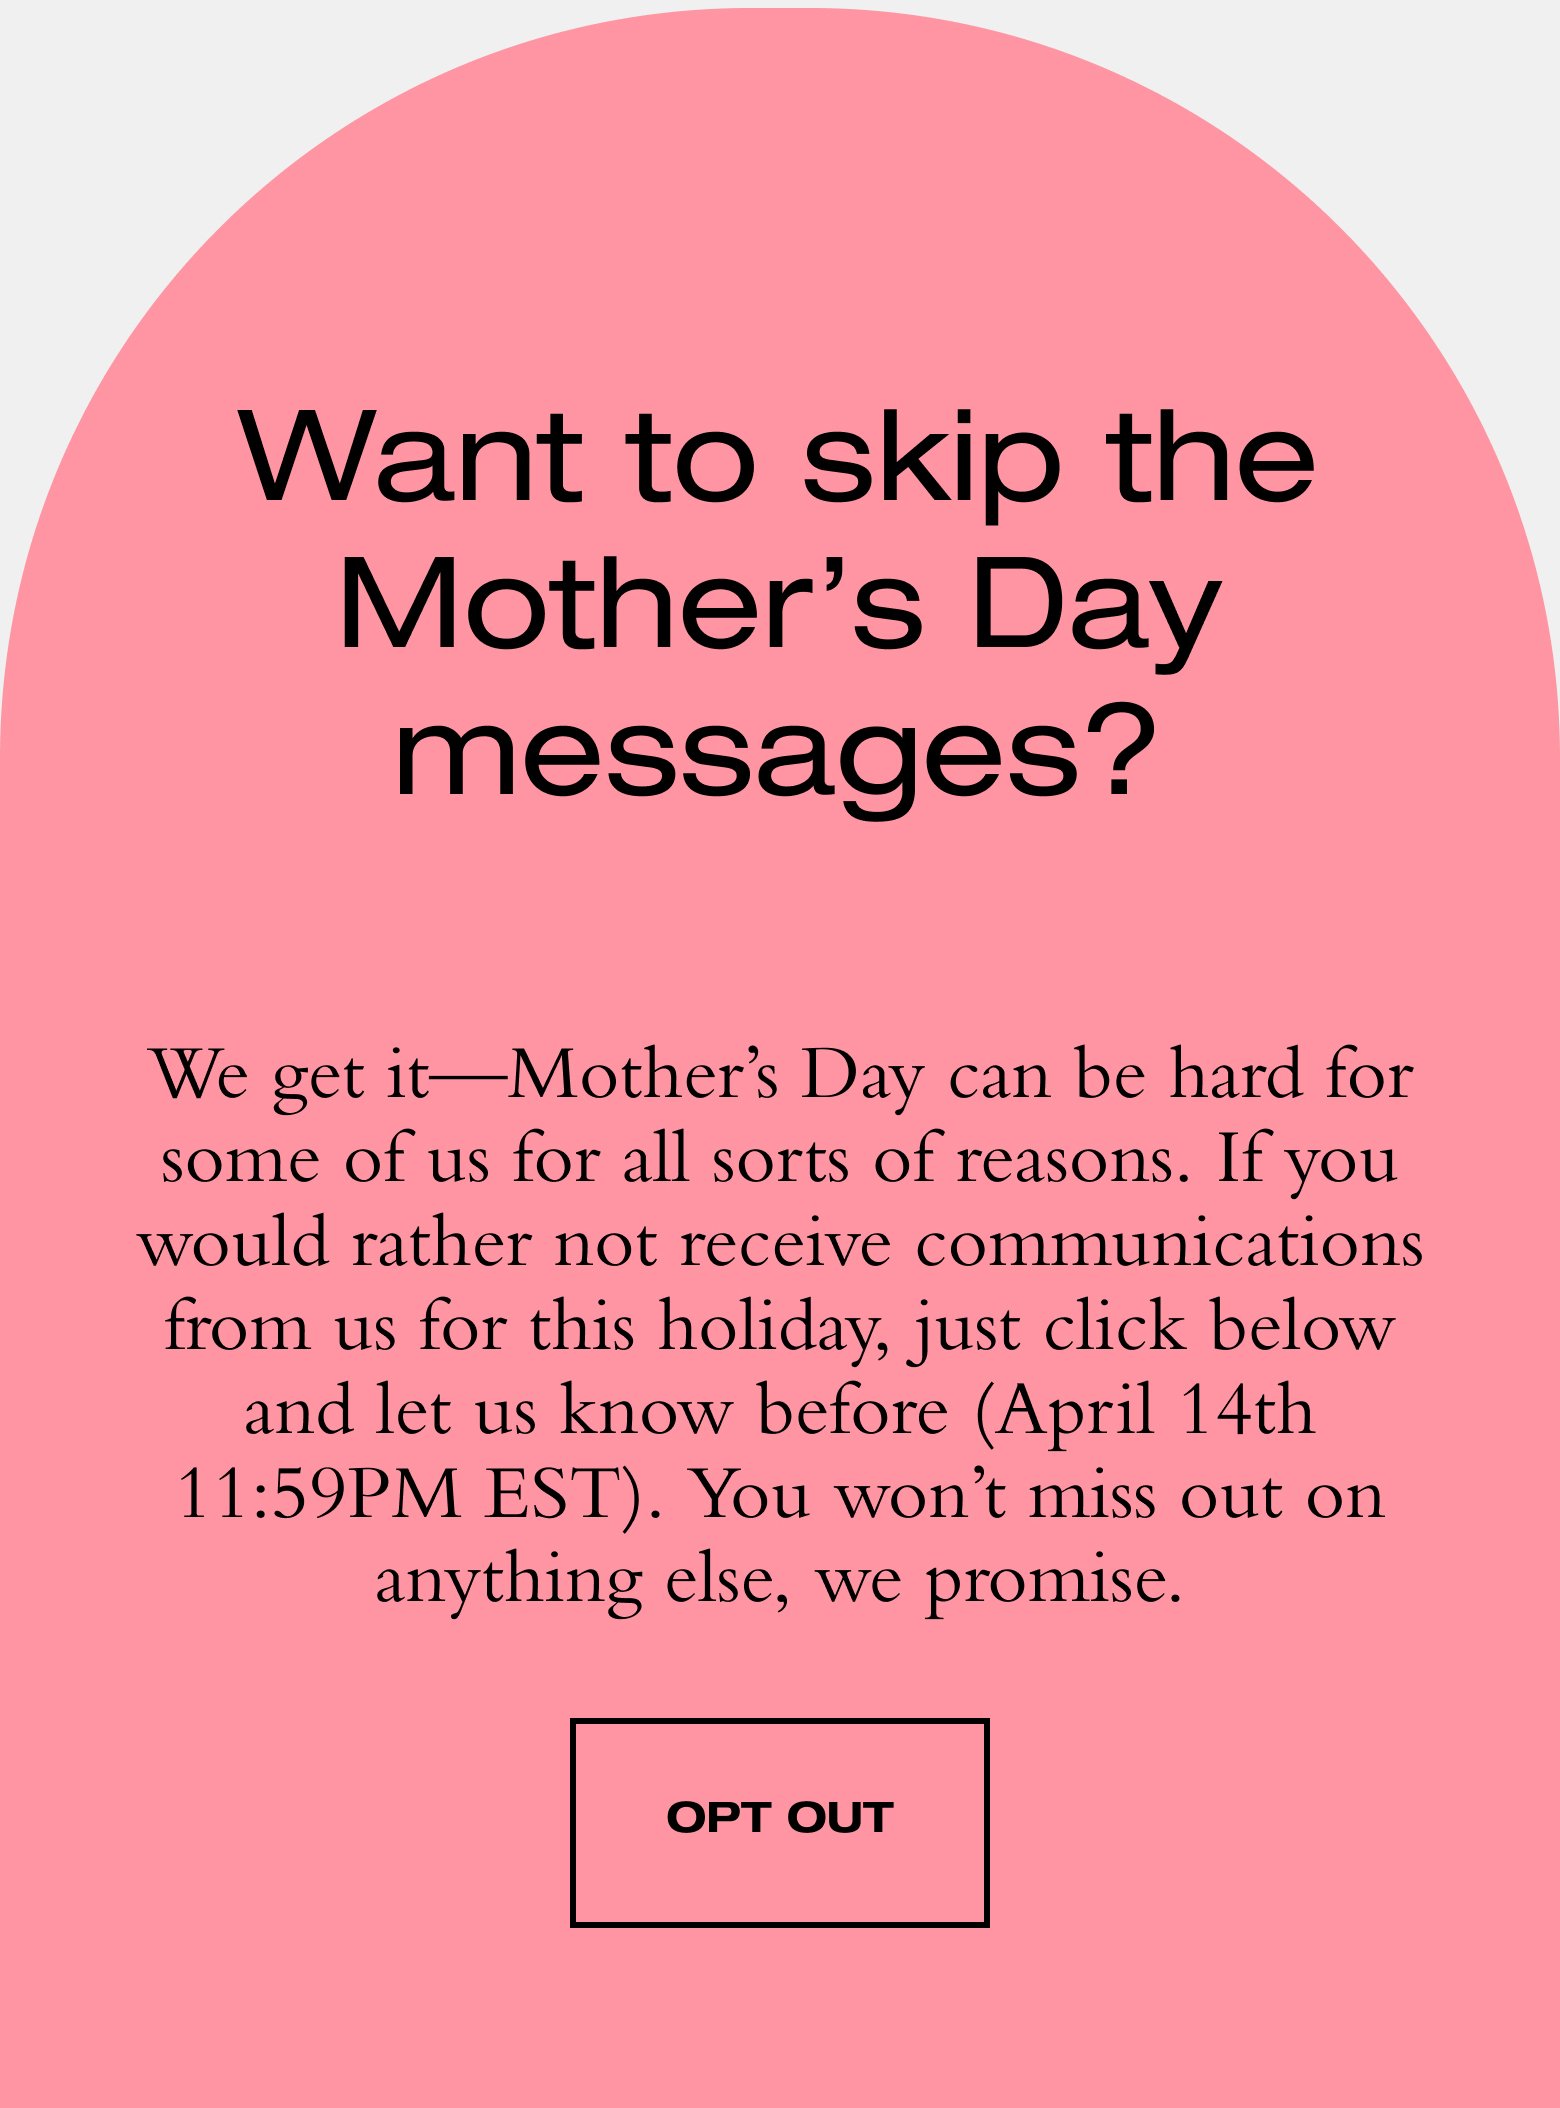 Want to skip the Mother’s Day messages? We get it—Mother’s Day can be hard for some of us for all sorts of reasons. If you would rather not receive communications from us for this holiday, just click below and let us know before (April 14th). You won’t miss out on anything else, we promise. OPT OUT